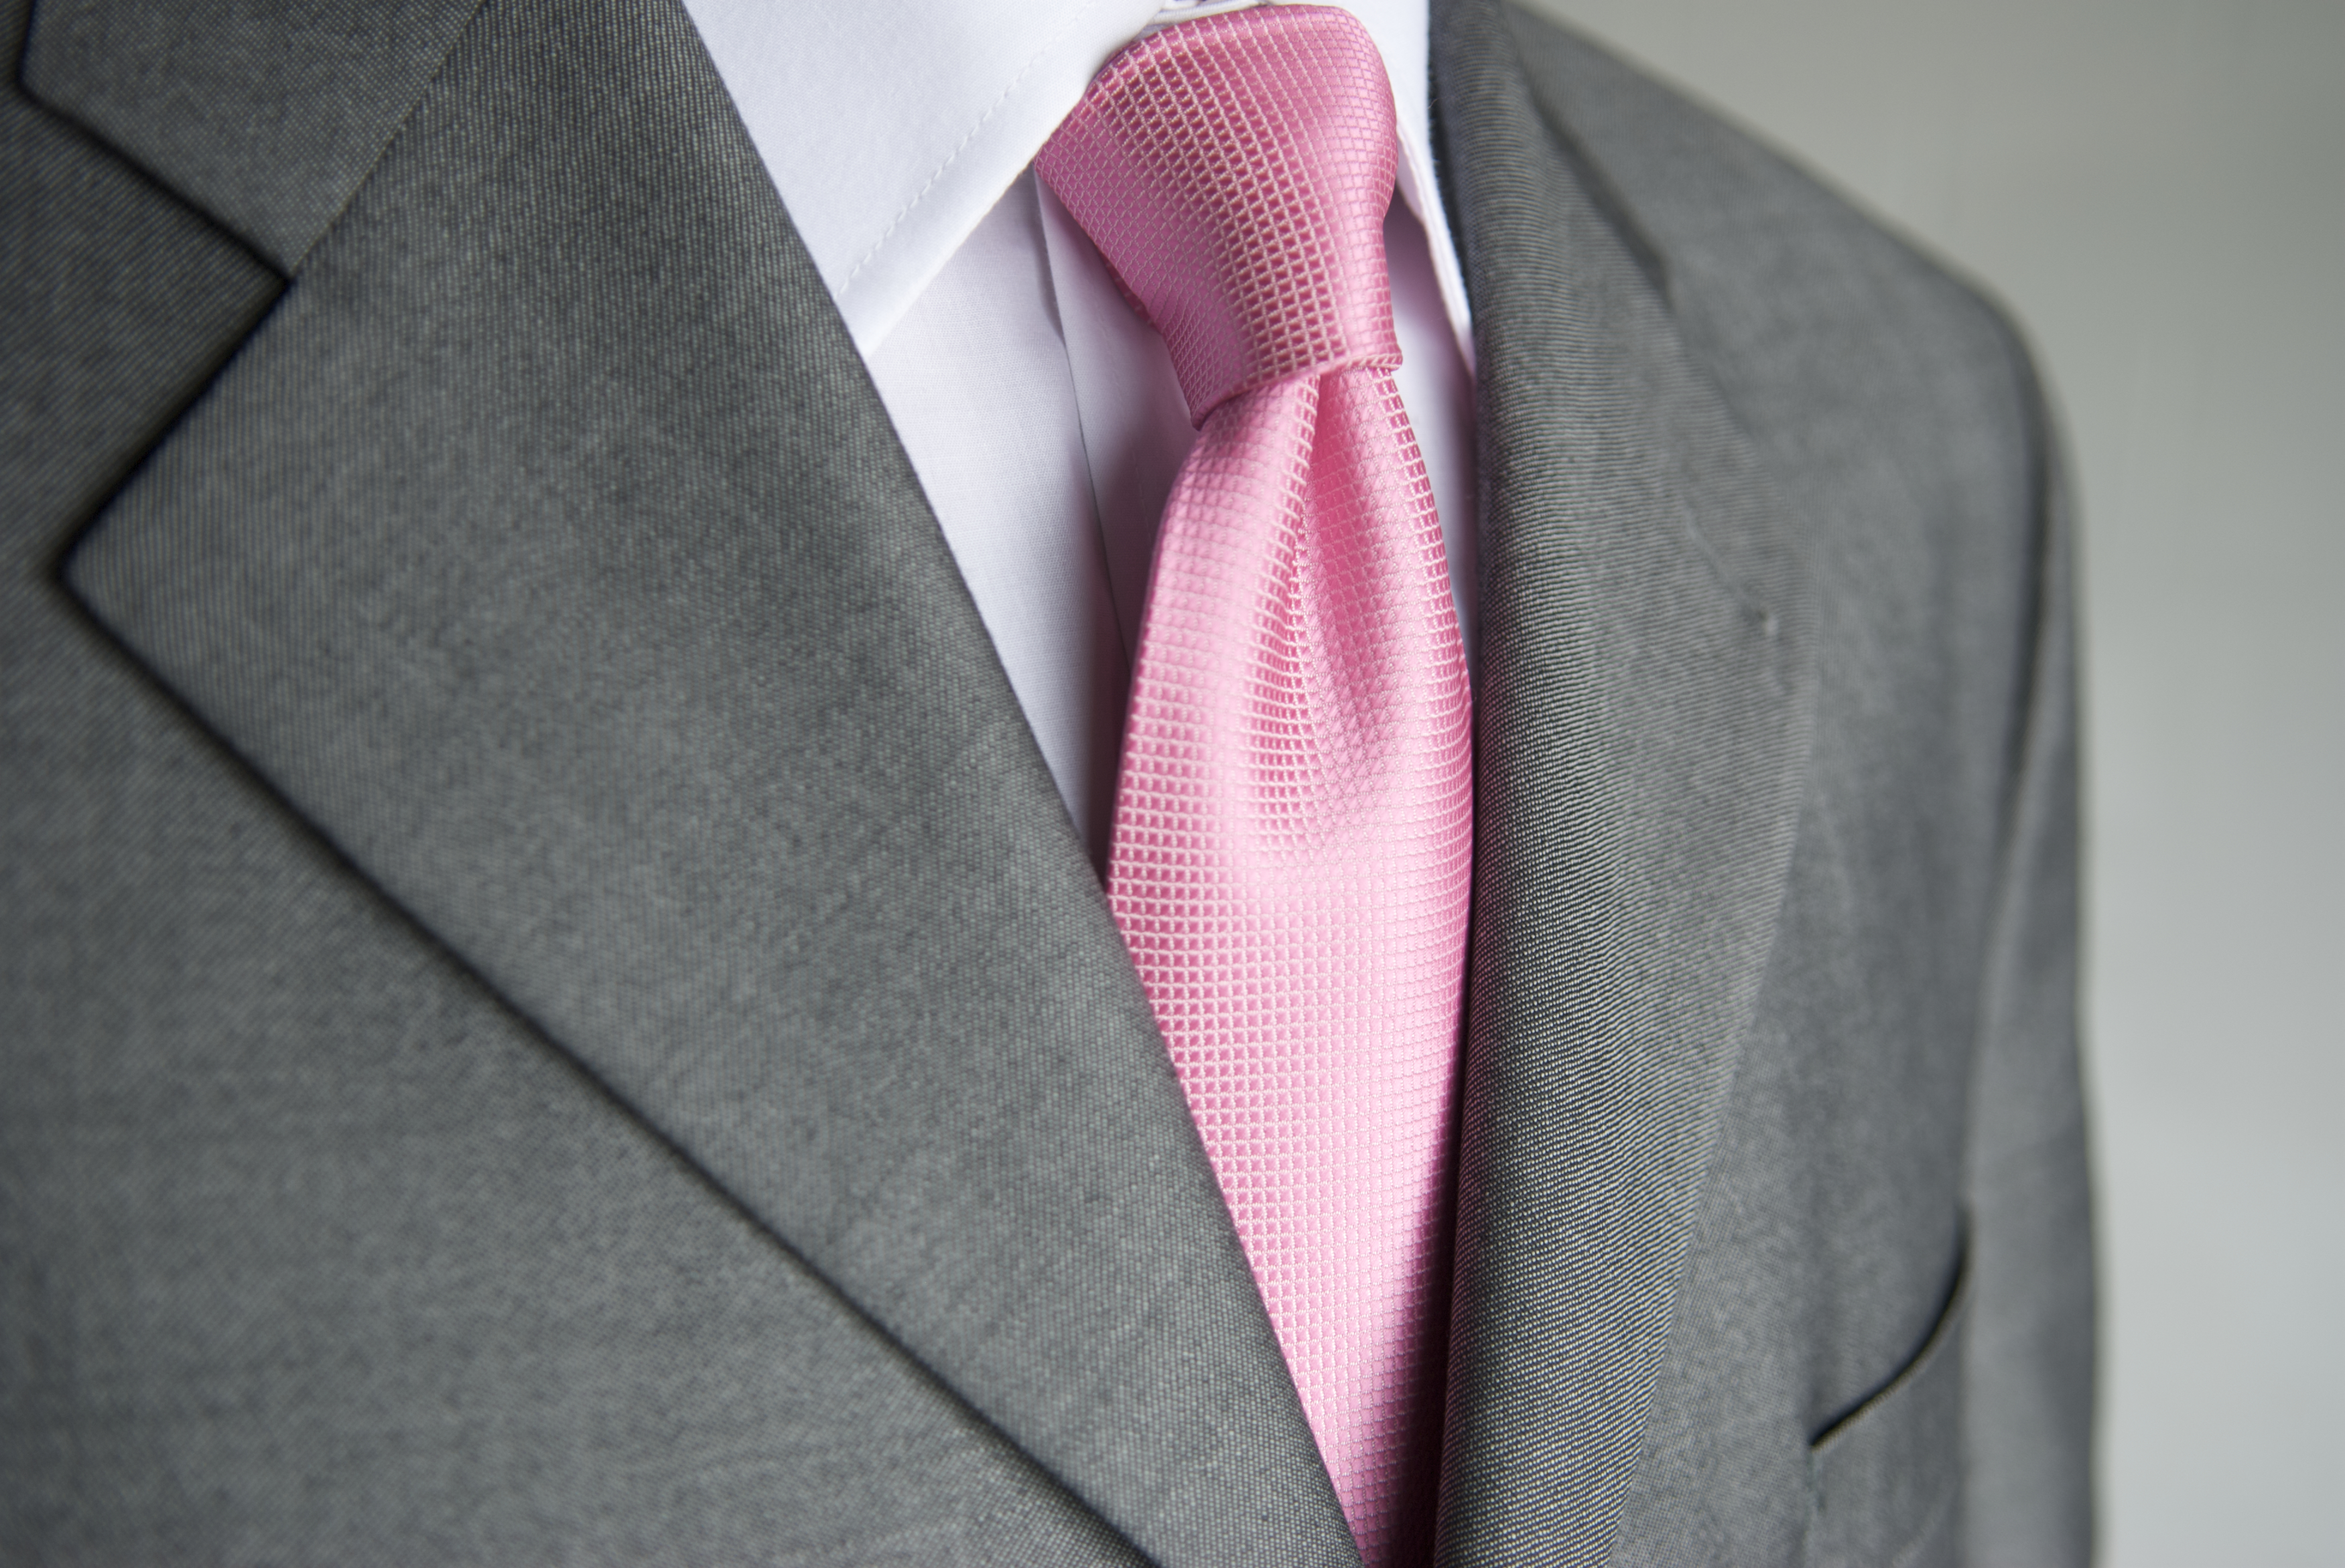 How to Tie a Simple-Knot Tie, Personal Styling